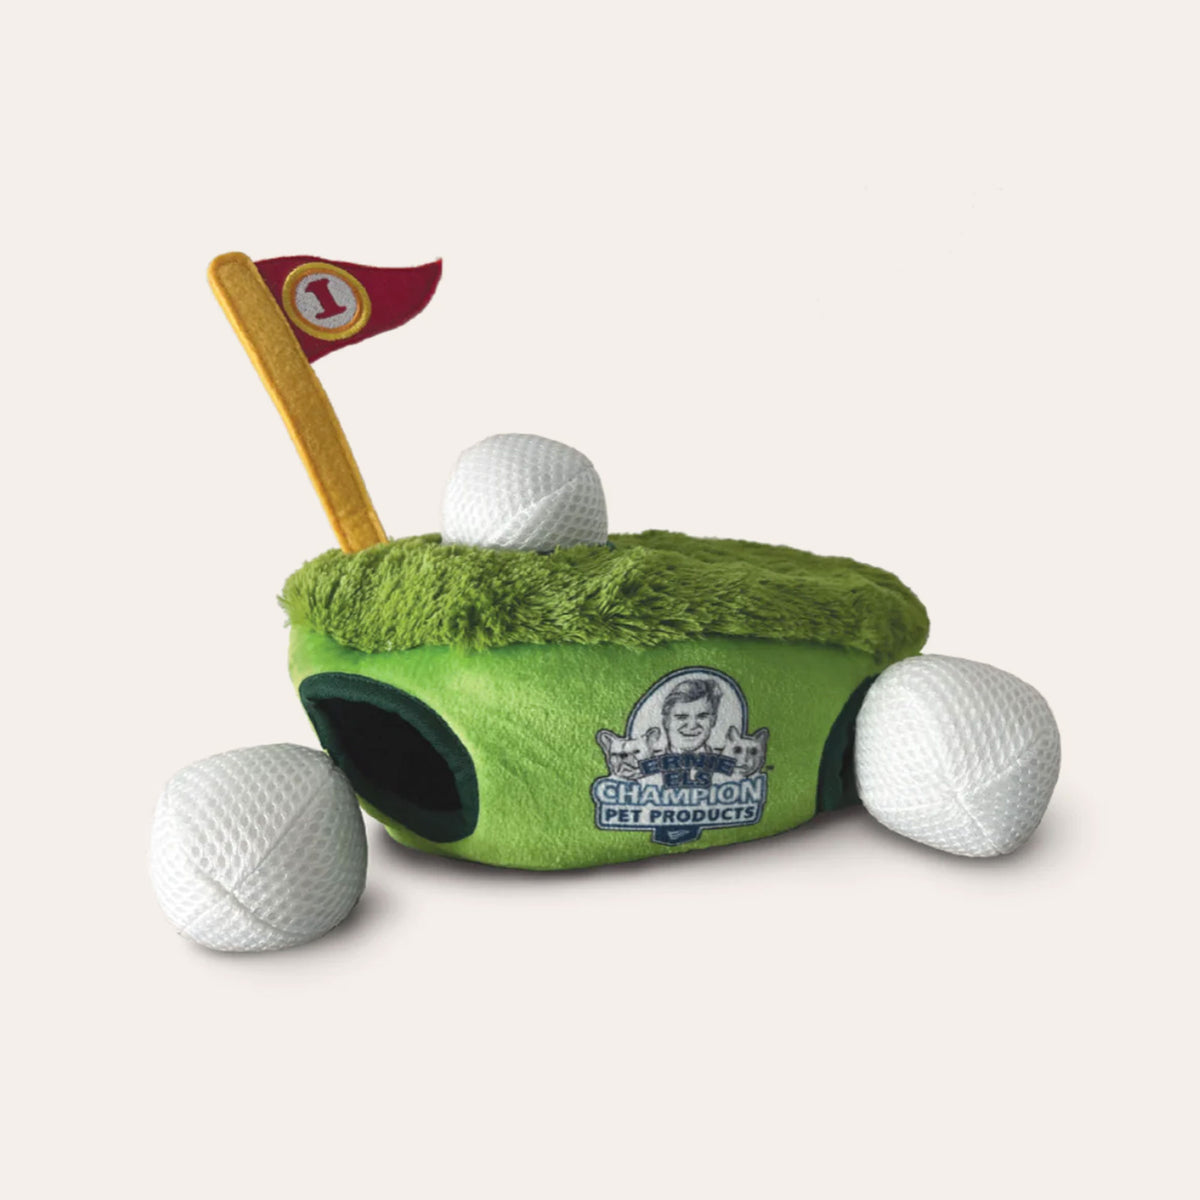 Image of product: Ernie Els Champion Pet Products - Ernie's Hole-in-One Hide & Seek Plush Toy Squeaker